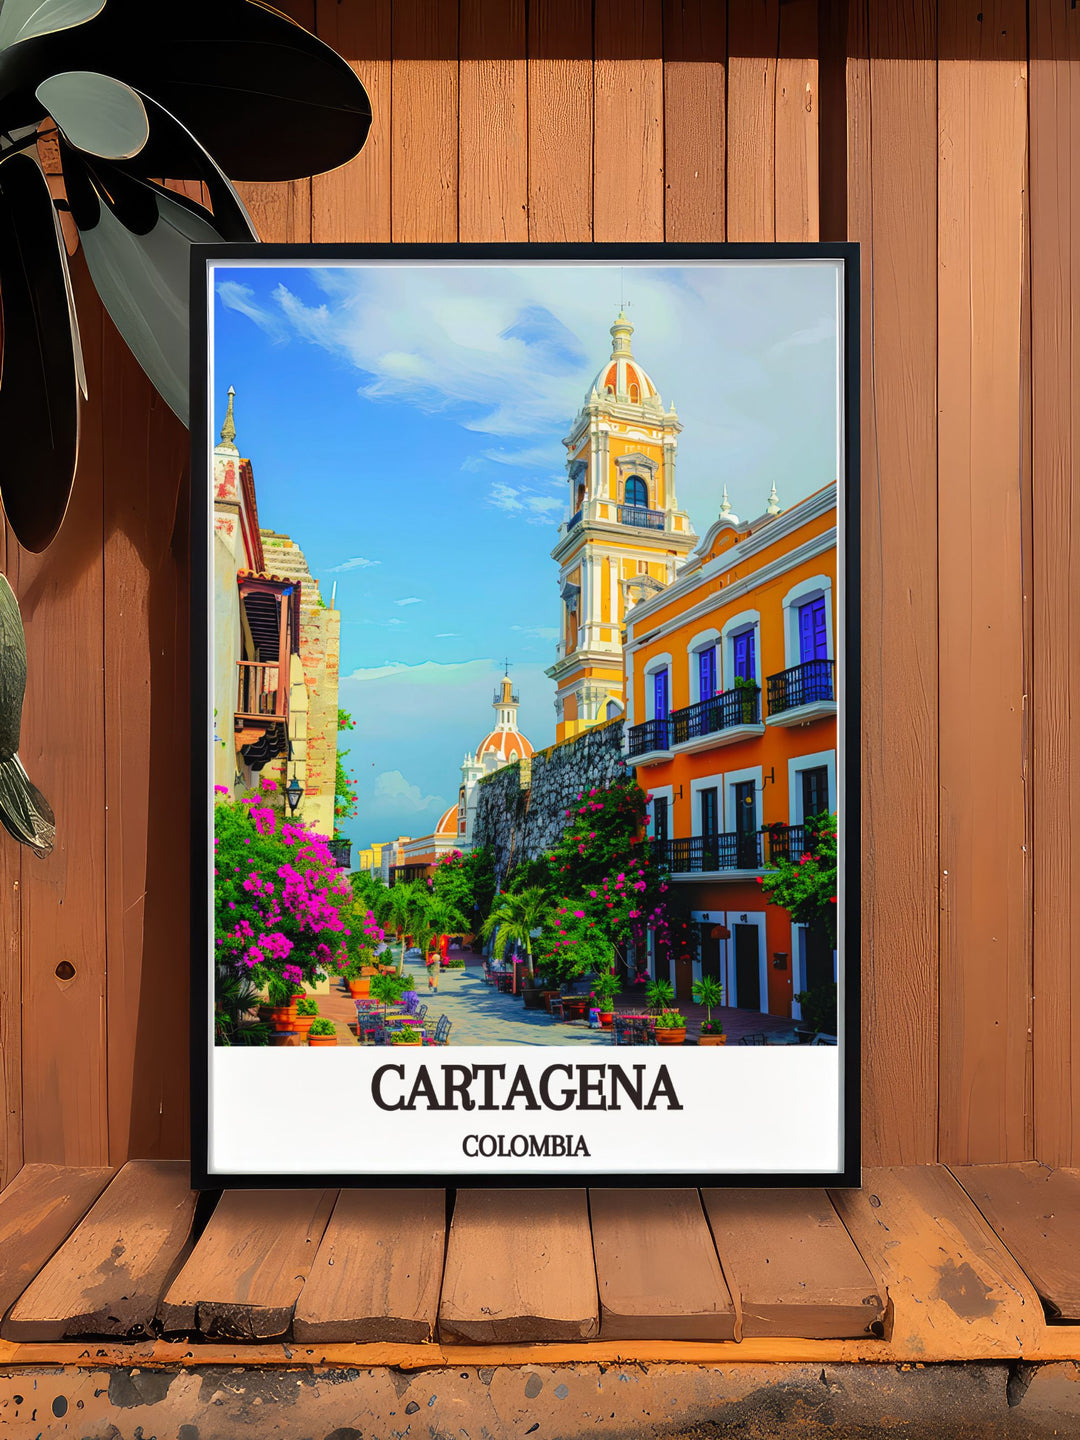 This travel poster captures the iconic Castillo San Felipe de Barajas in Cartagena, featuring its robust fortifications and panoramic views. Ideal for adding a touch of the citys historic splendor to your home decor and celebrating one of Colombias most significant landmarks.